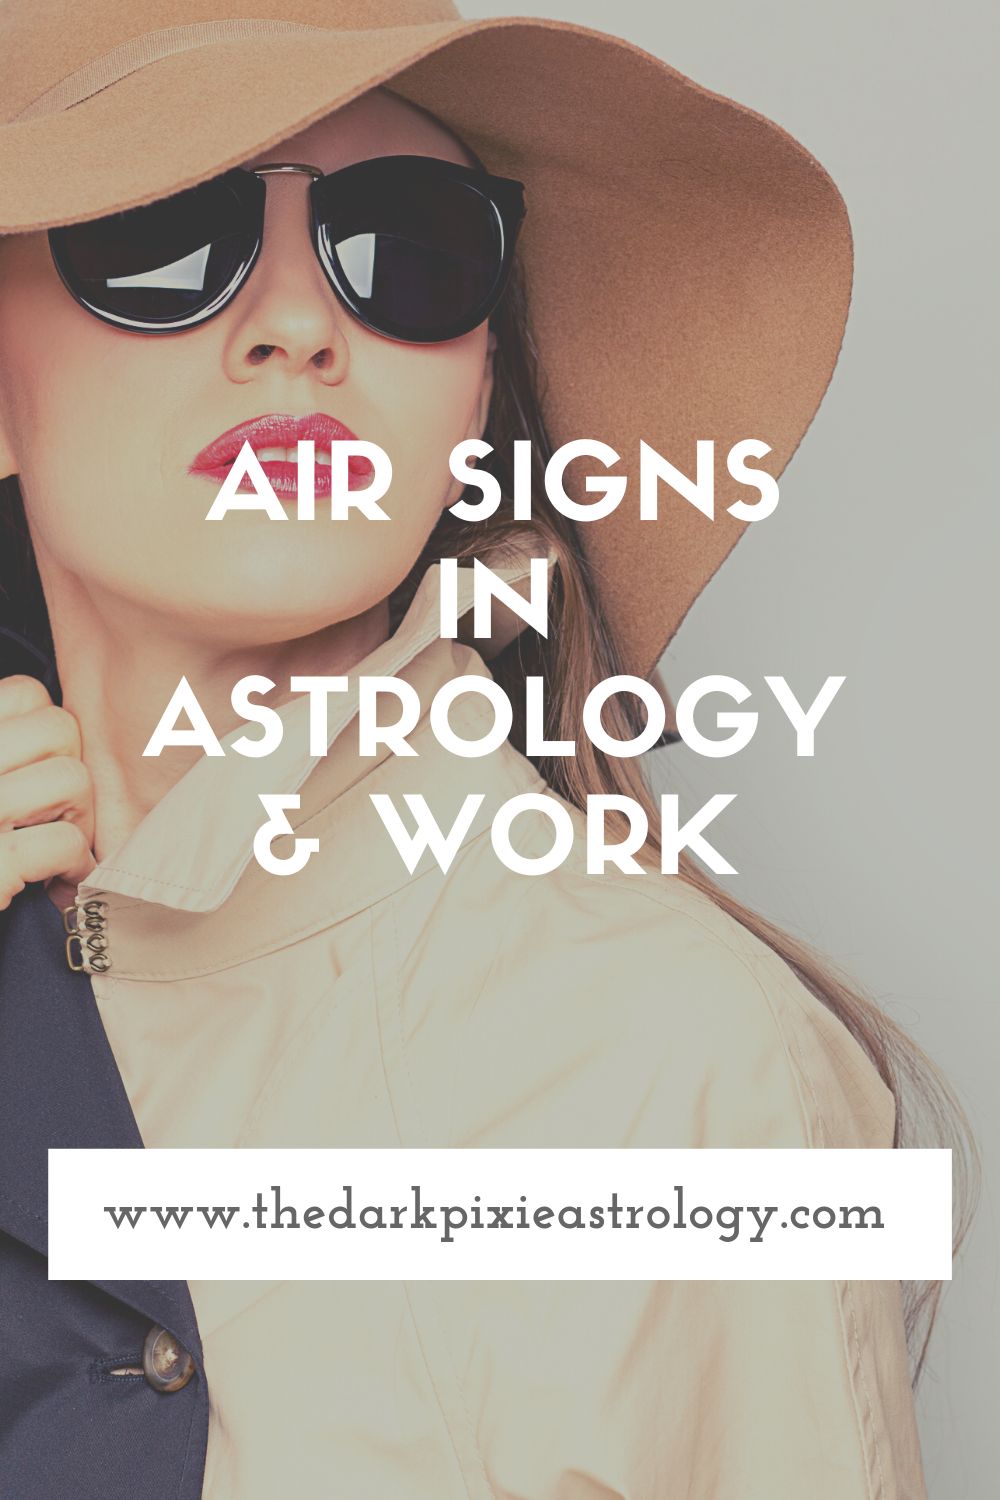 Air Signs in Astrology & Work - The Dark Pixie Astrology